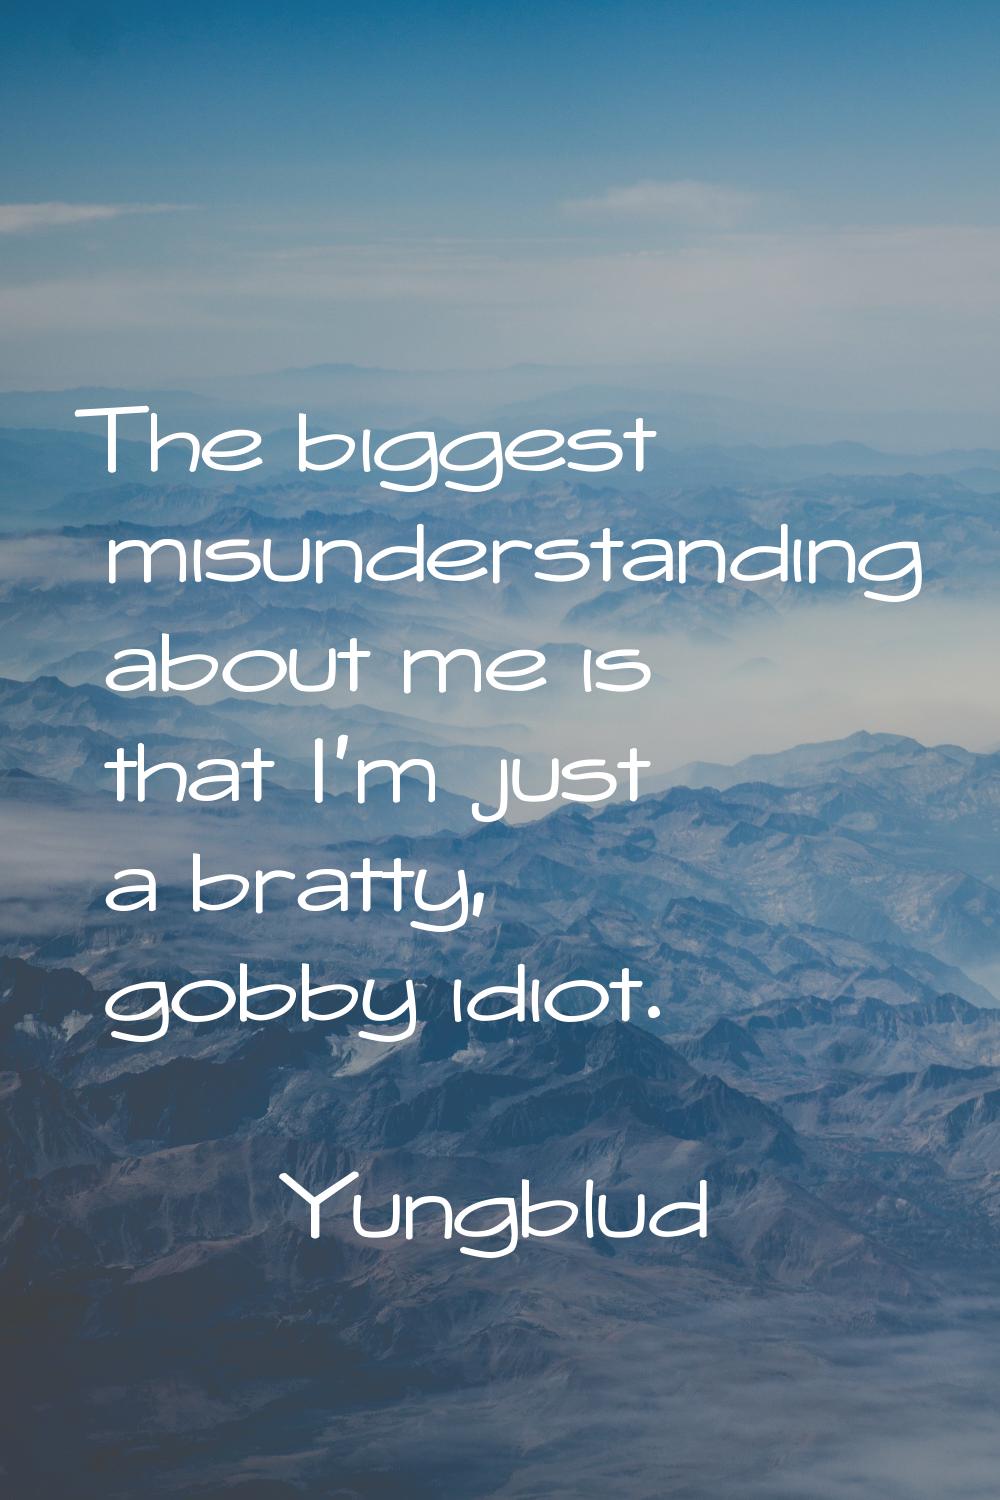 The biggest misunderstanding about me is that I'm just a bratty, gobby idiot.